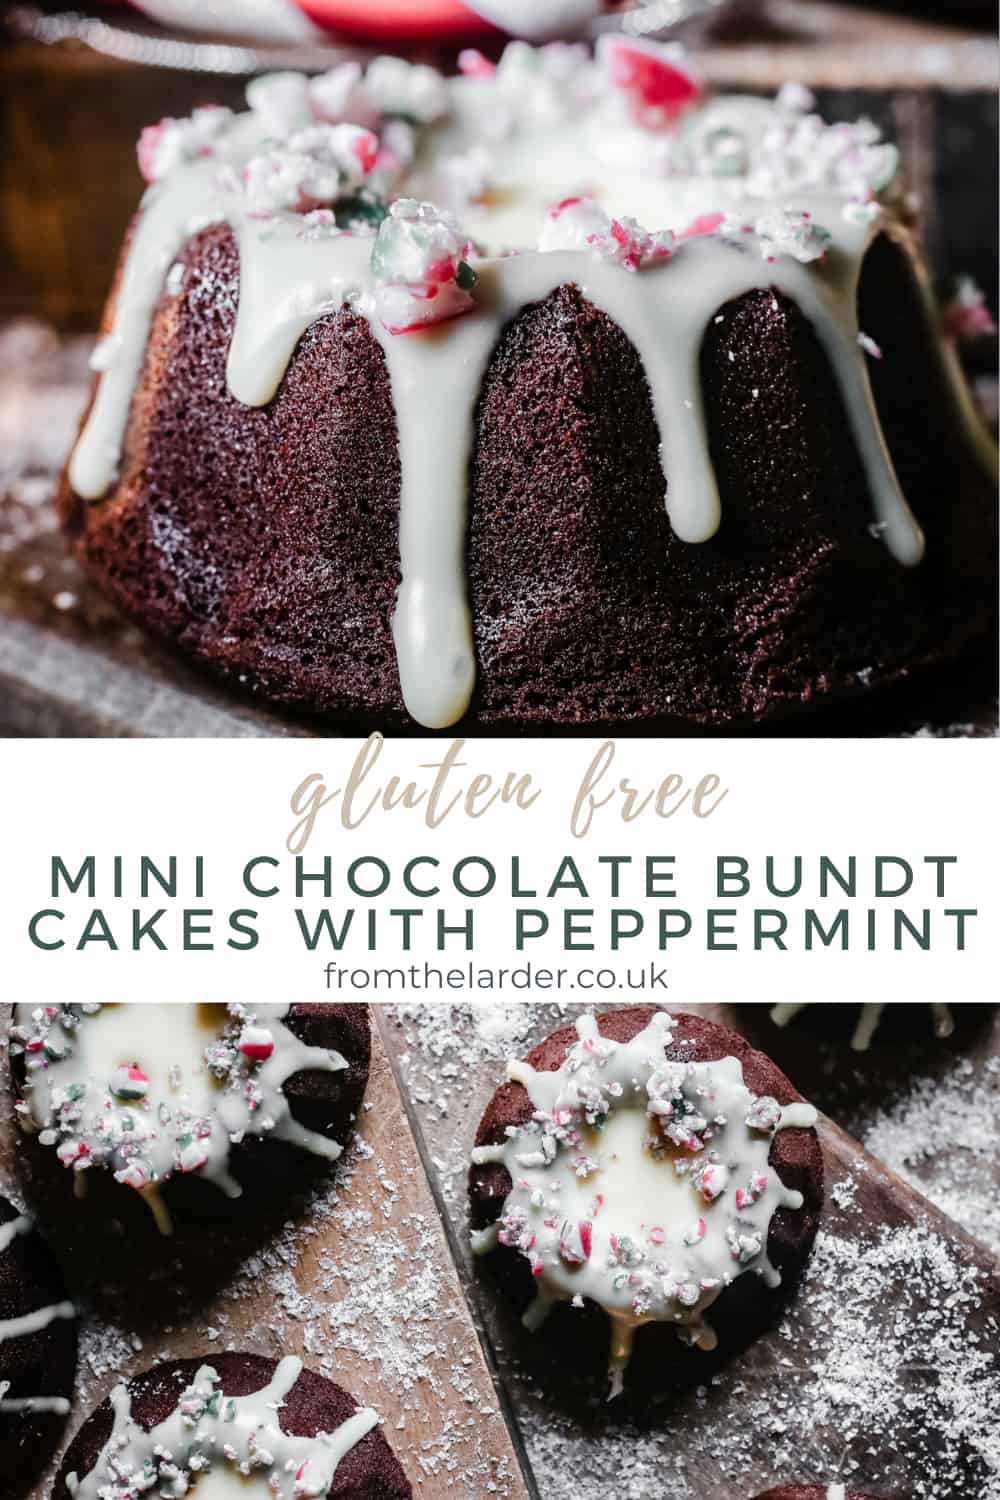 Pin image of Mini Chocolate Bundt Cakes with Peppermint. One image is a close up of the cake, the other is of the cakes from overhead. With title text in between the images.